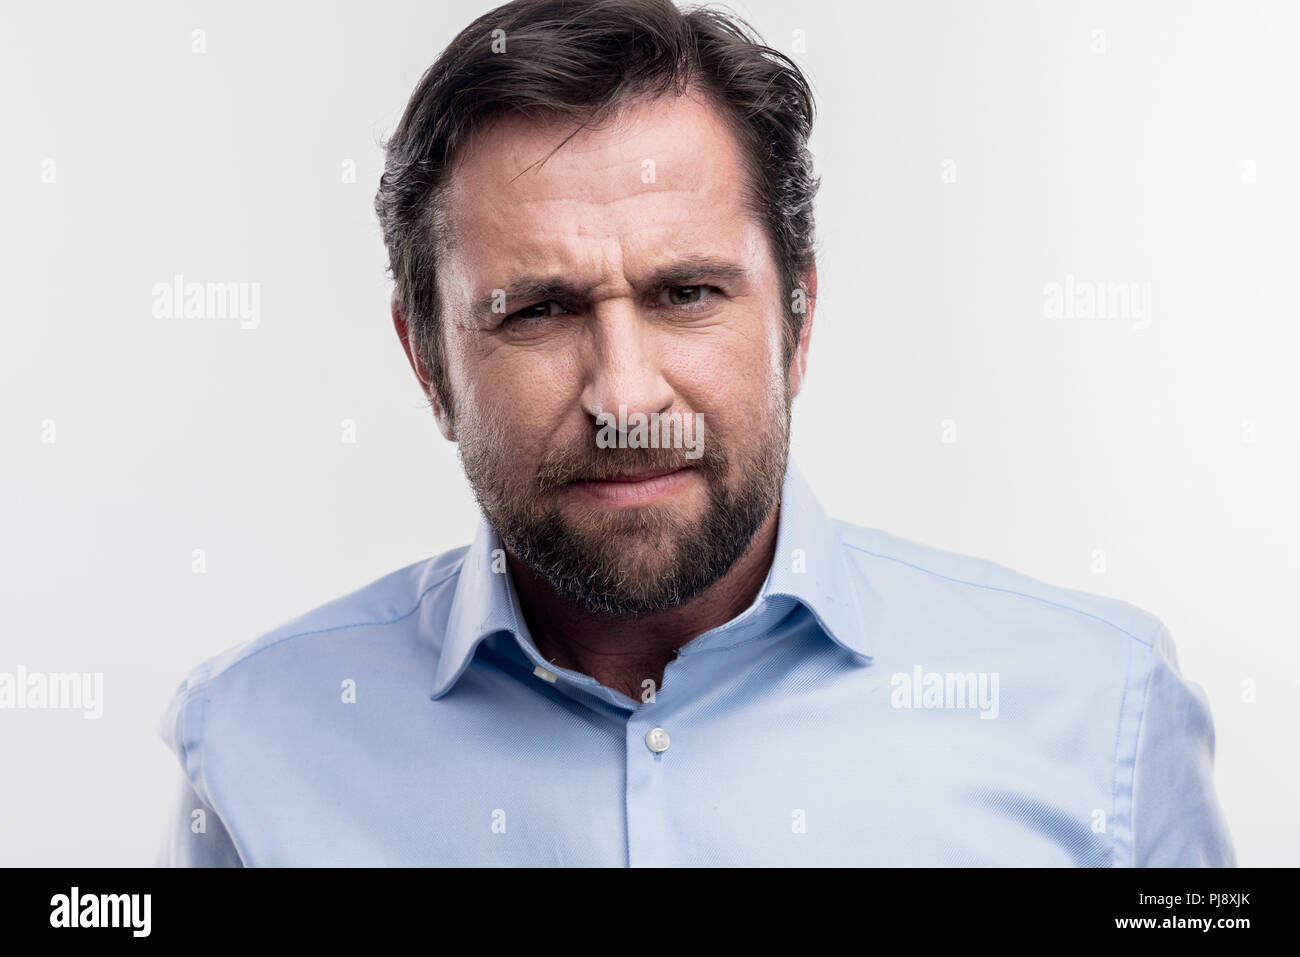 Bearded dark-haired man feeling angry after some arguments at work Stock Photo